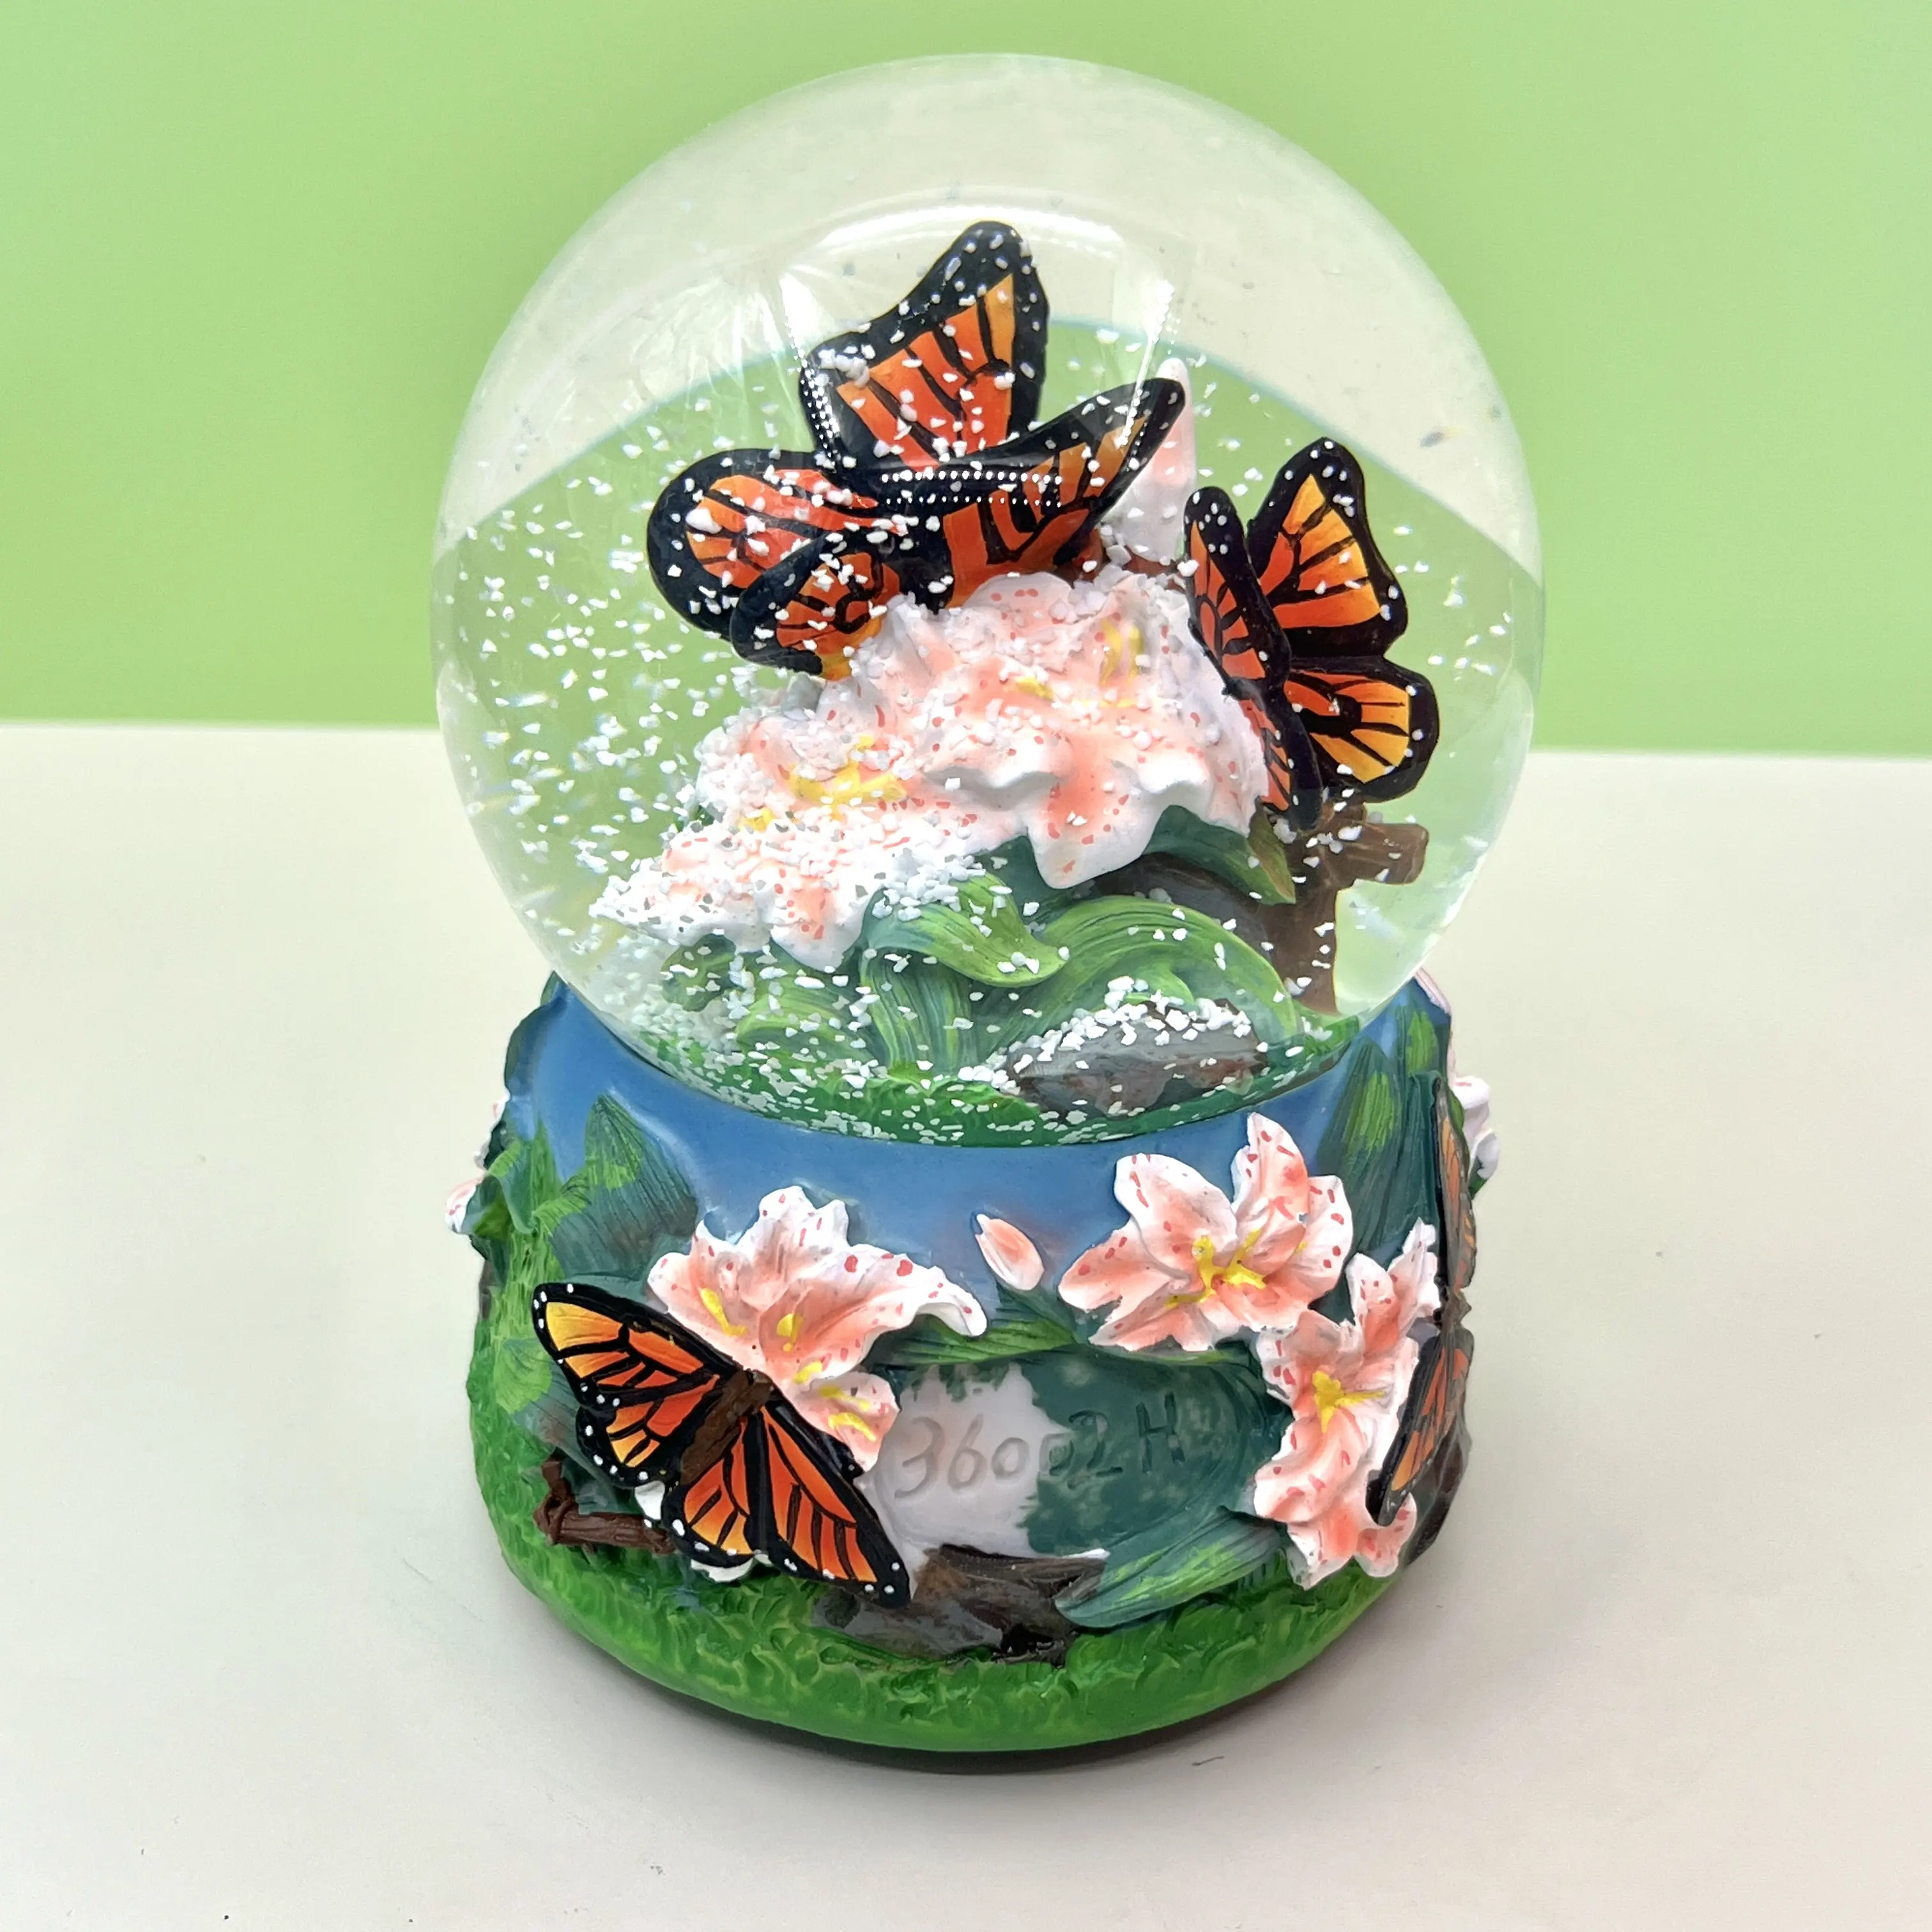 Wholesale custom resin water ball glass table decor souvenirs gift animal dragonflies Snow Globes